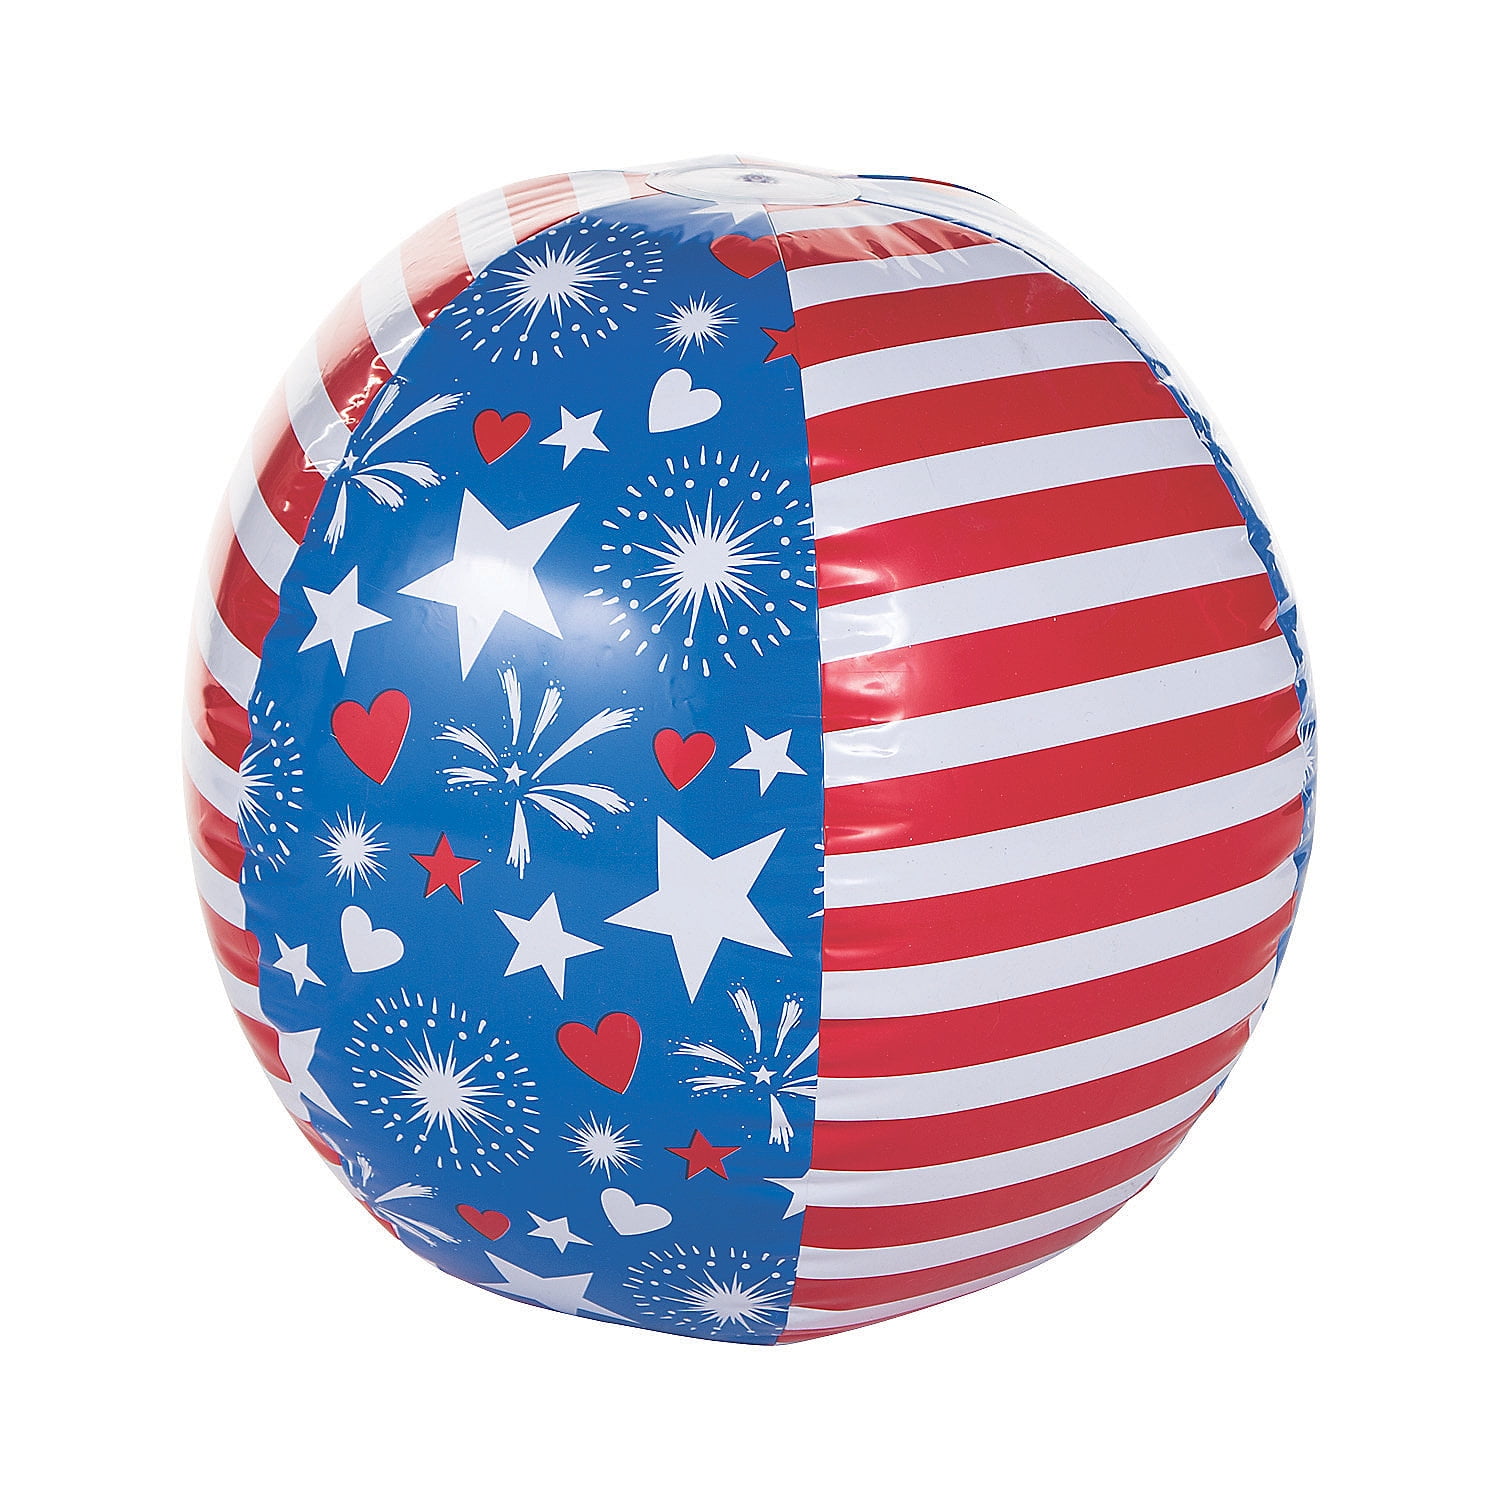 Swimline Americana 90016 22" Inflatable Beach Ball Pool Toy American Design for sale online 